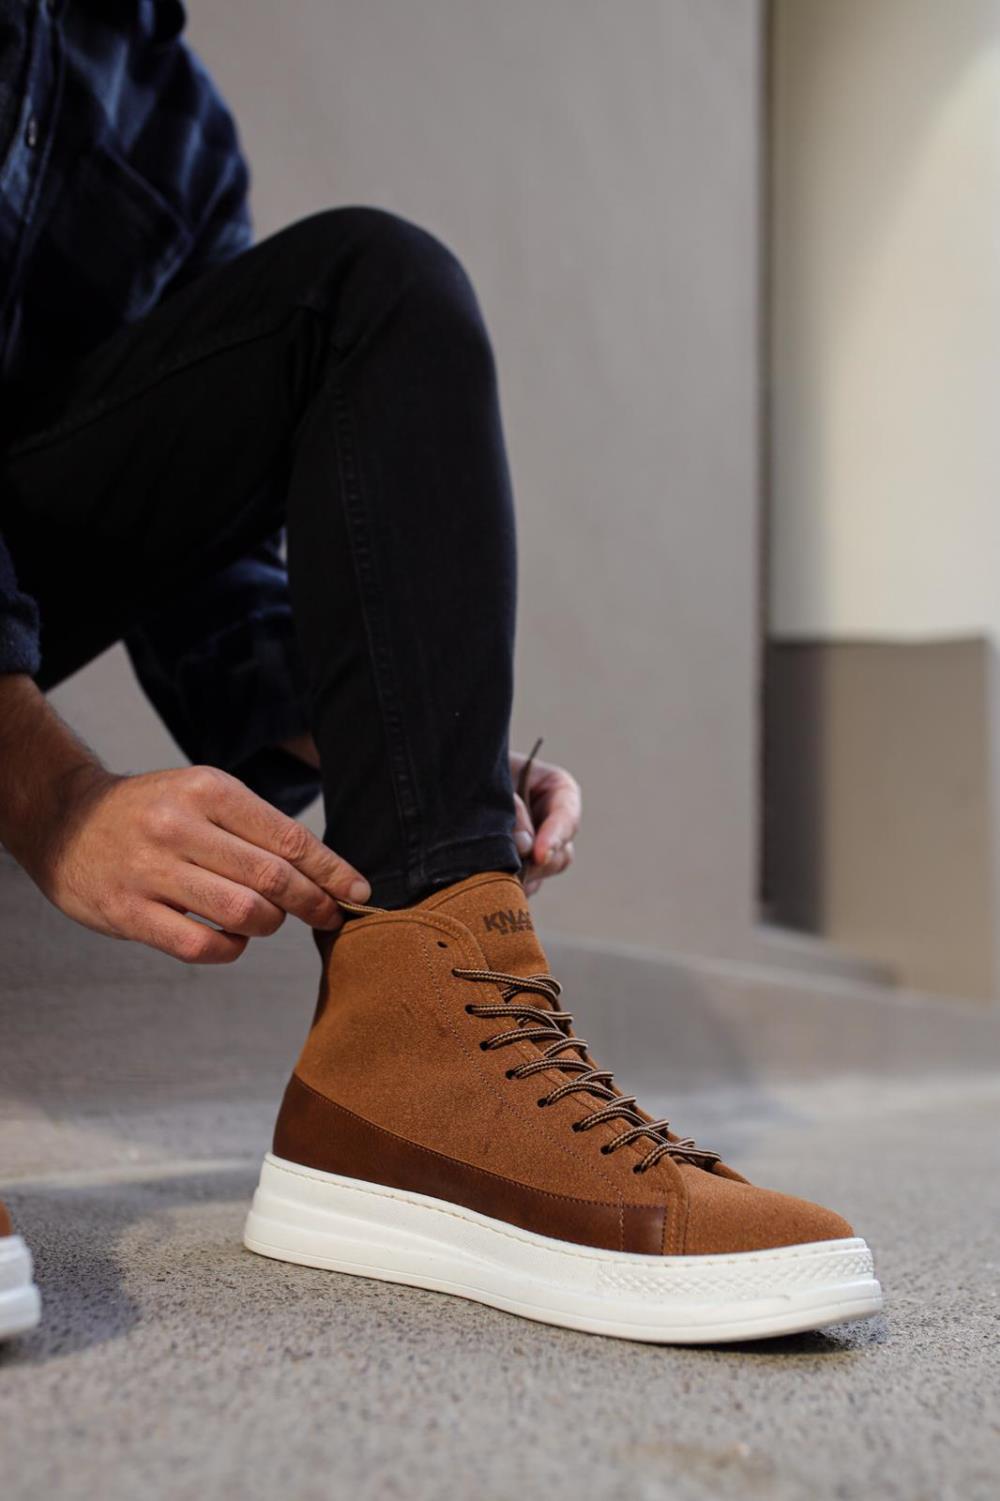 STM Boot Unisex High Sole Shoes C-030 Tan Suede - STREETMODE ™